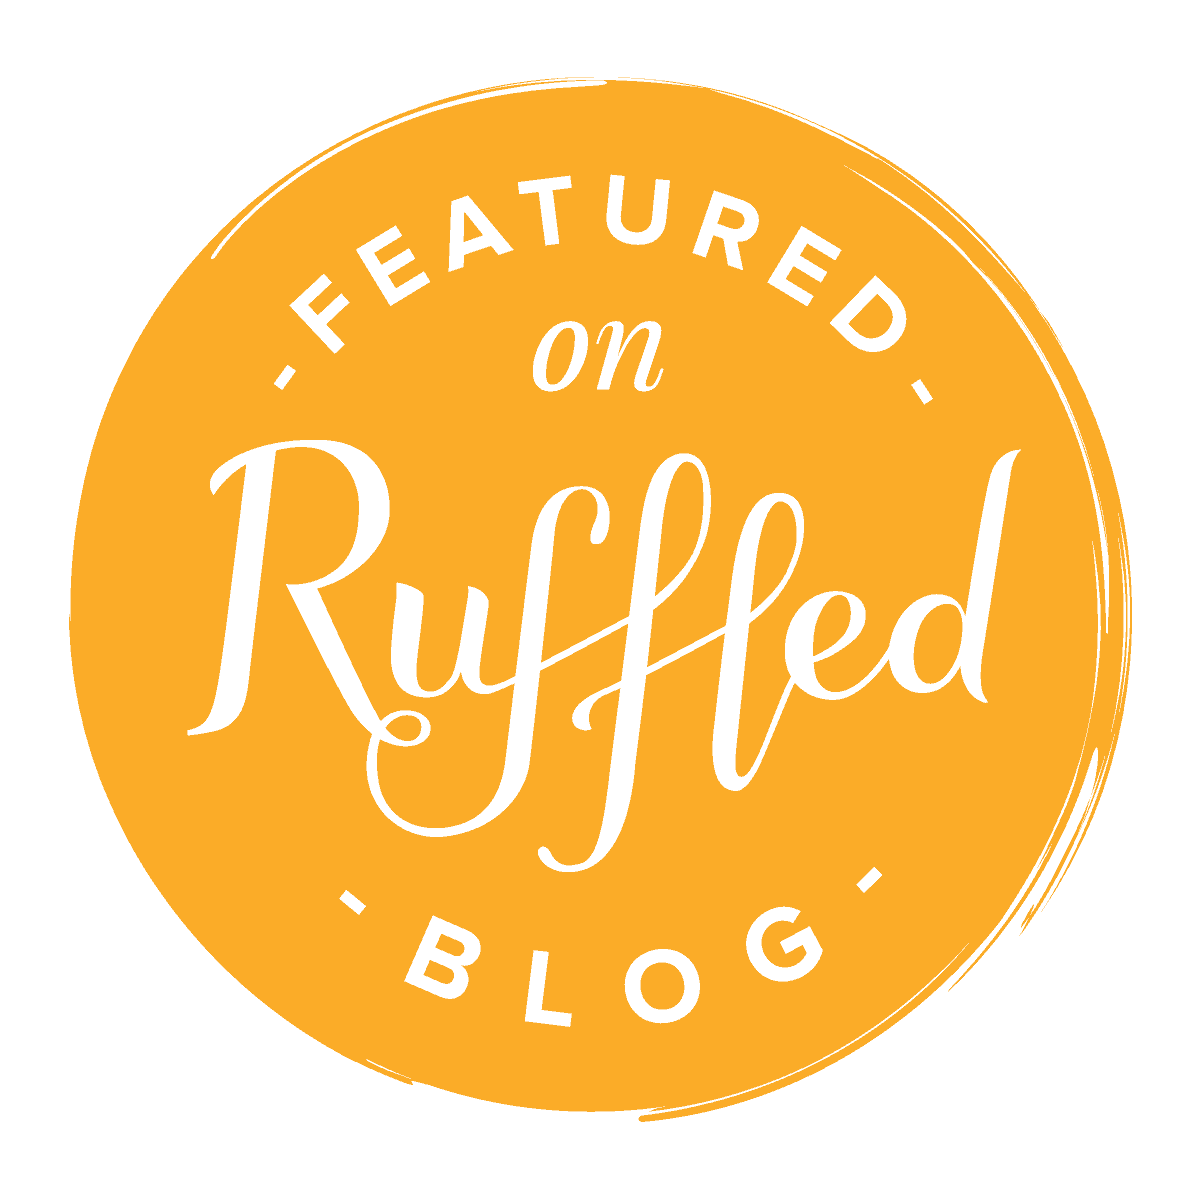 Ruffled_12-Featured-ORANGE.png